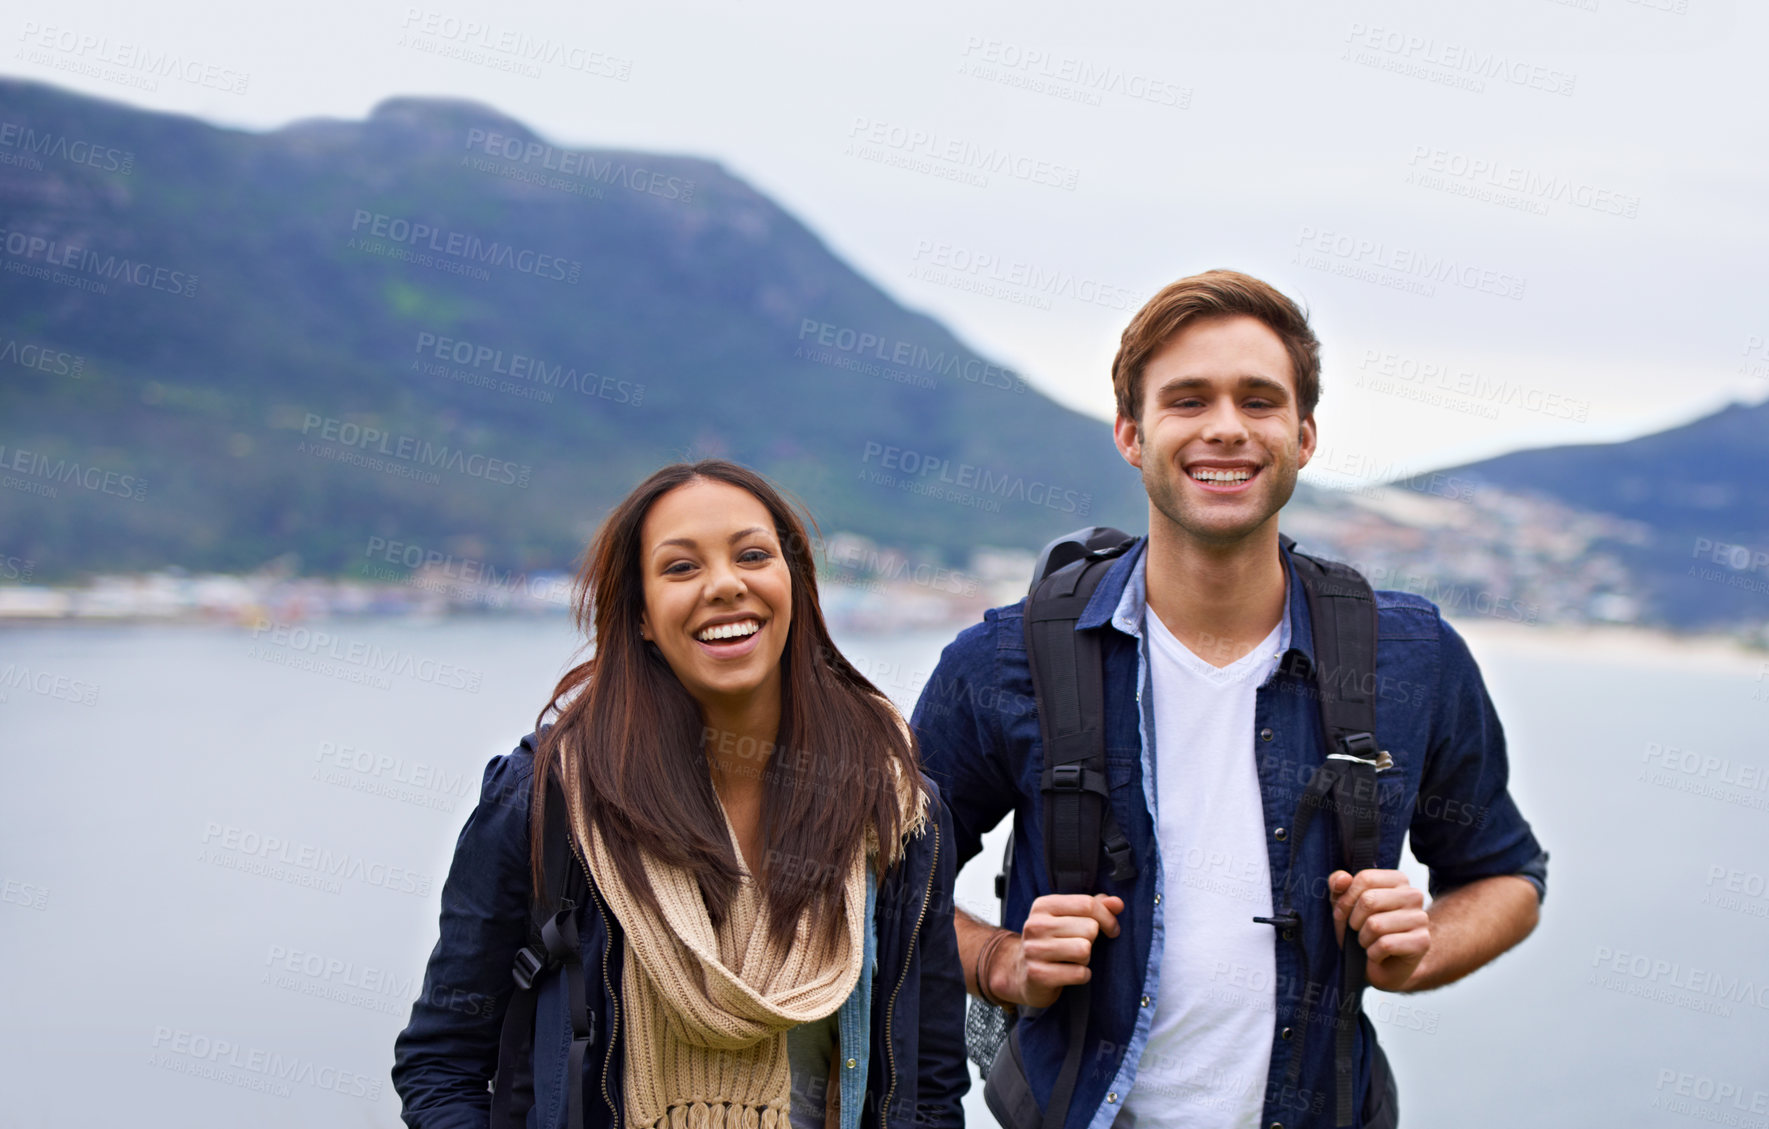 Buy stock photo A happy young couple with backpacks enjoying nature